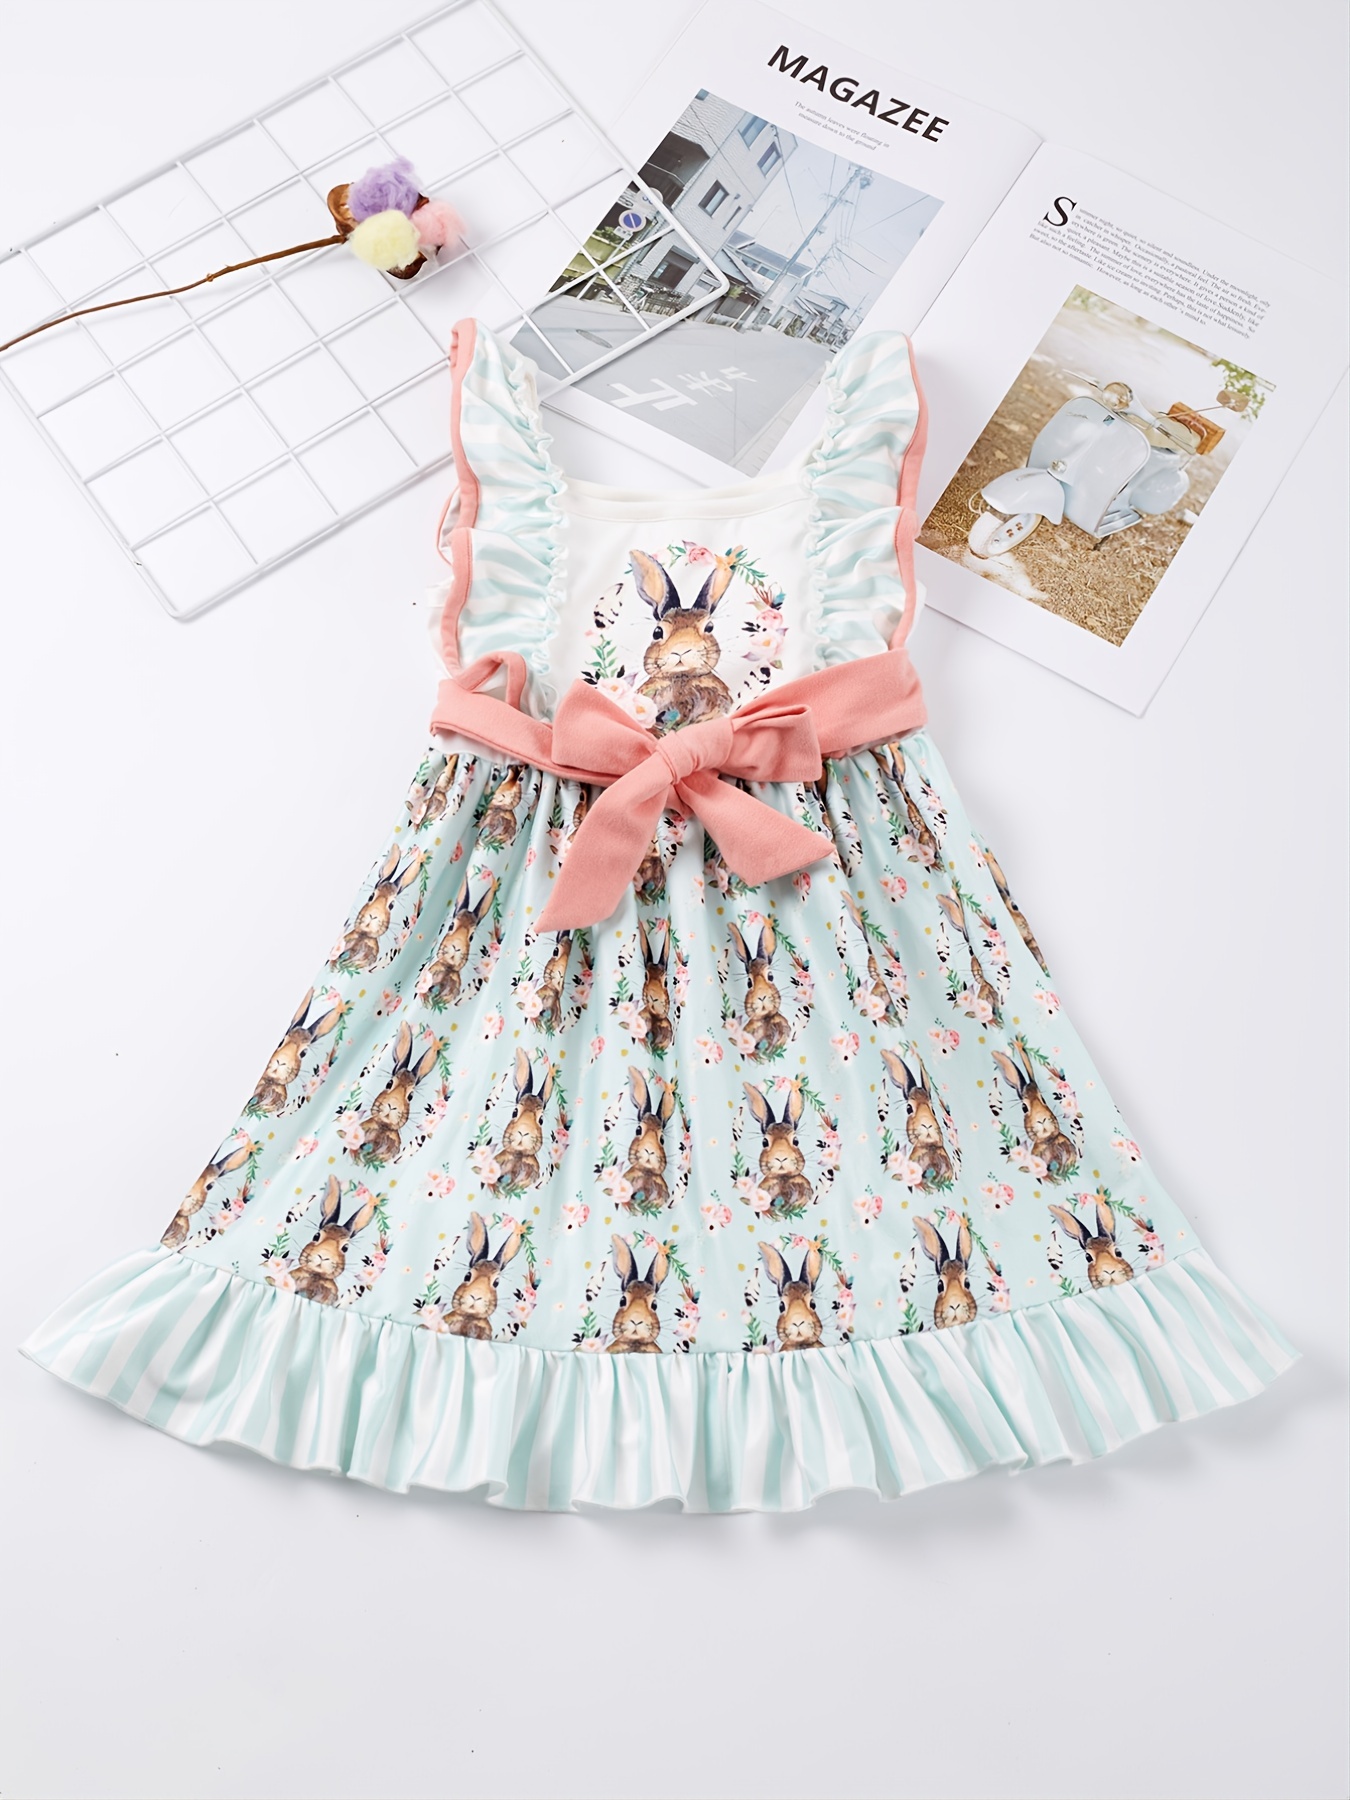 Easter Cartoon Rabbit Printed Princess Dress for Toddler Baby Girls Cute  Sleeveless Pleated Flowy Party Dress with Bowknot Headband Sets